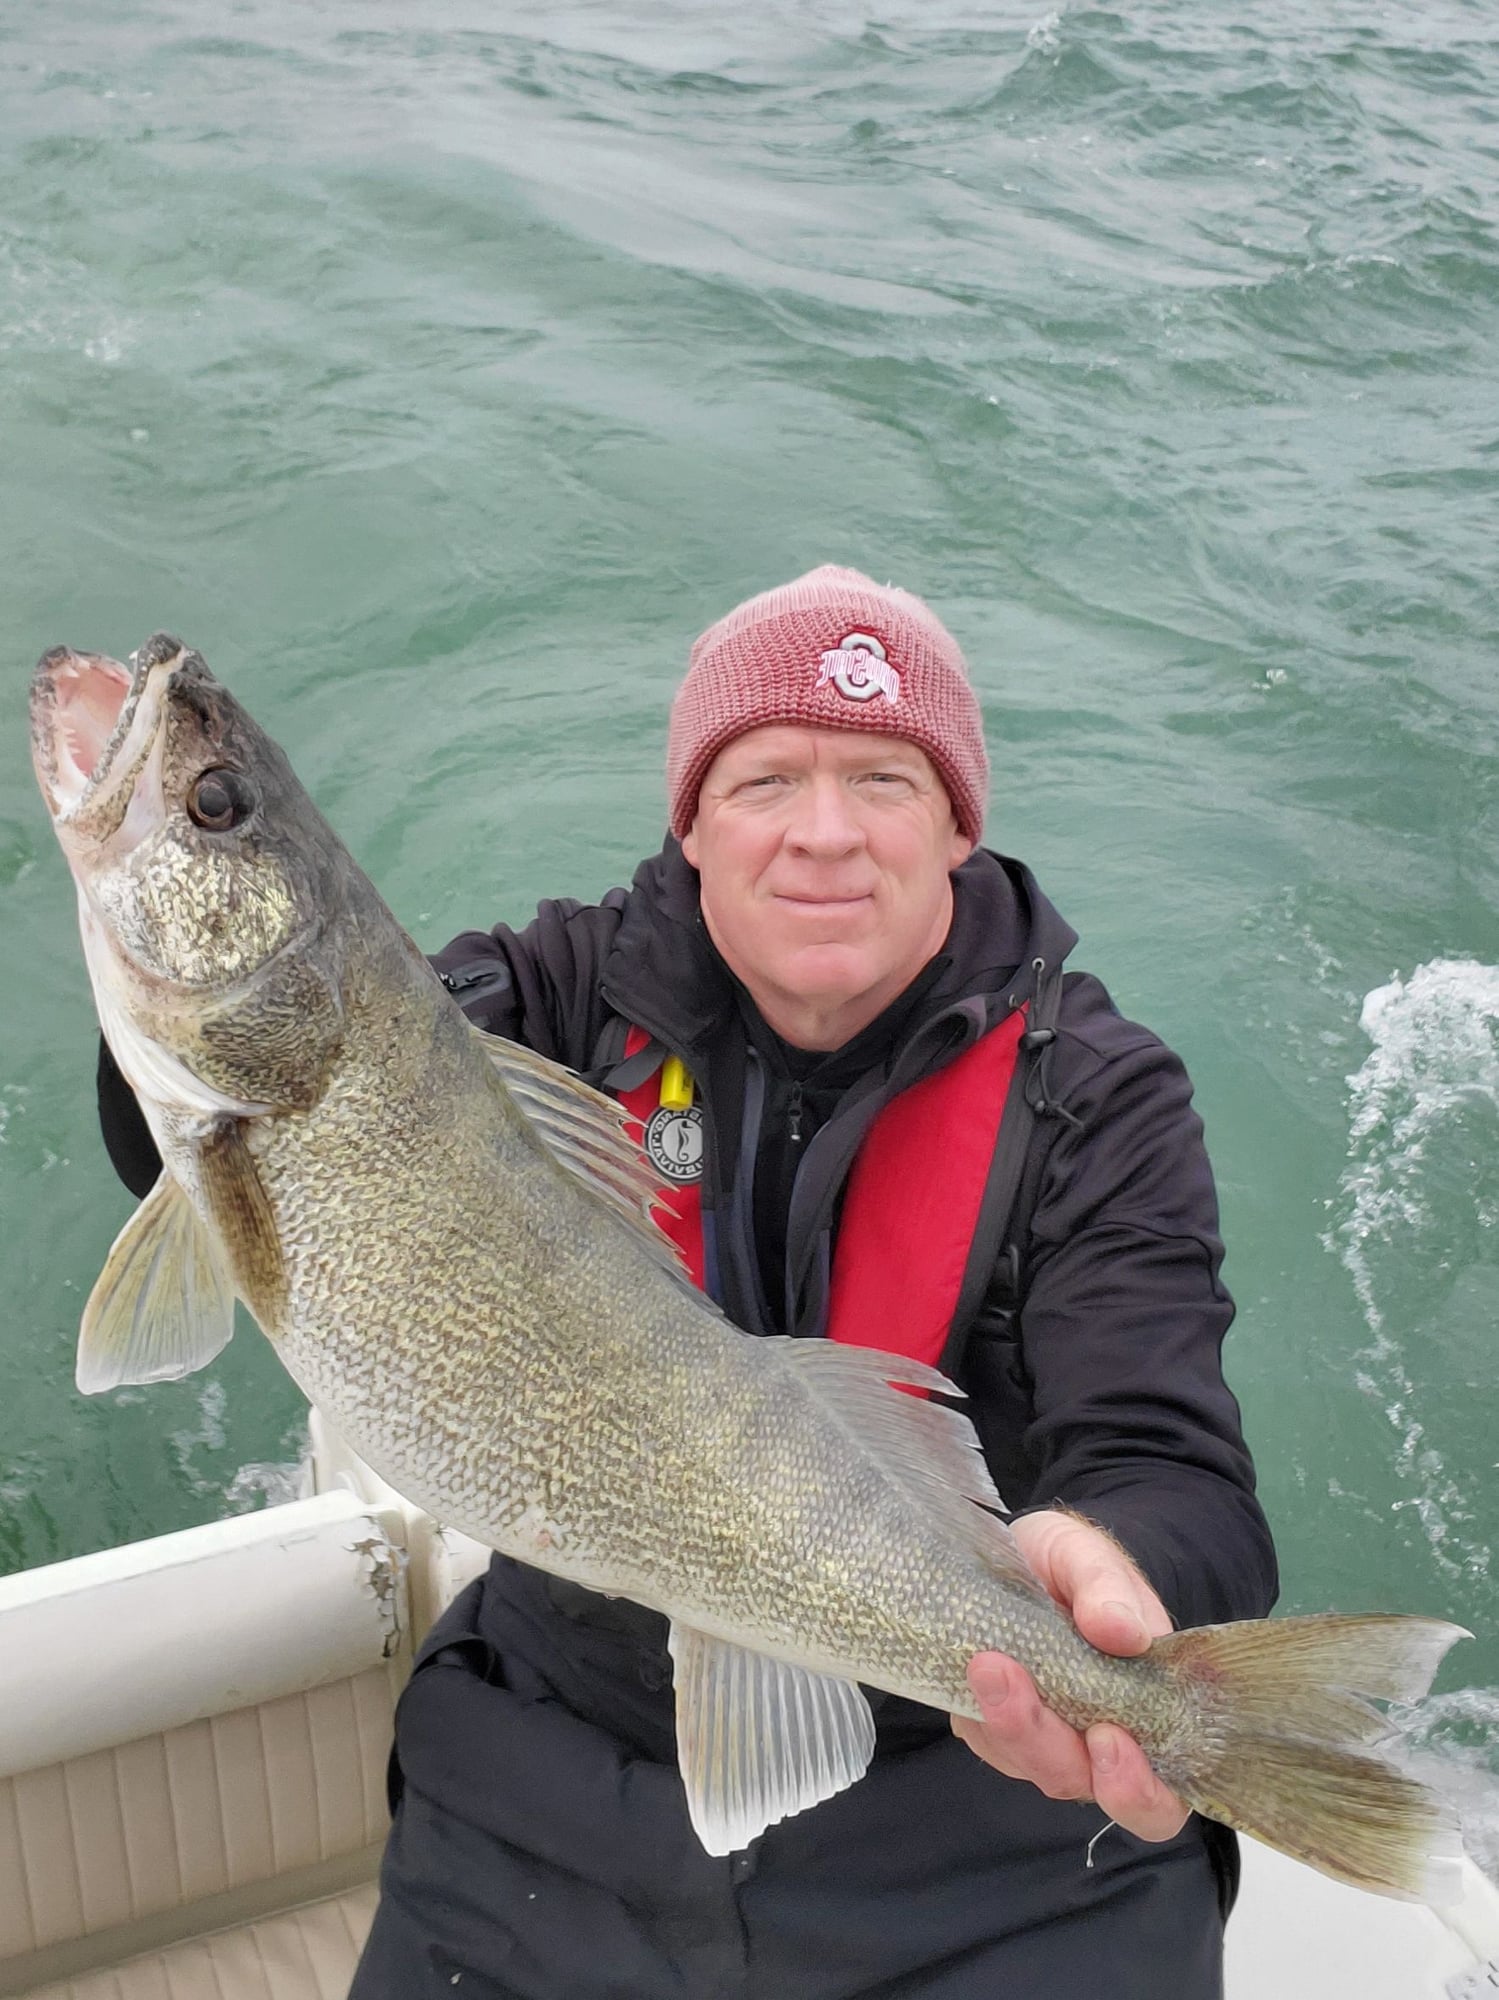 Western Lake Erie fishing report. - Page 104 - The Hull Truth - Boating and  Fishing Forum